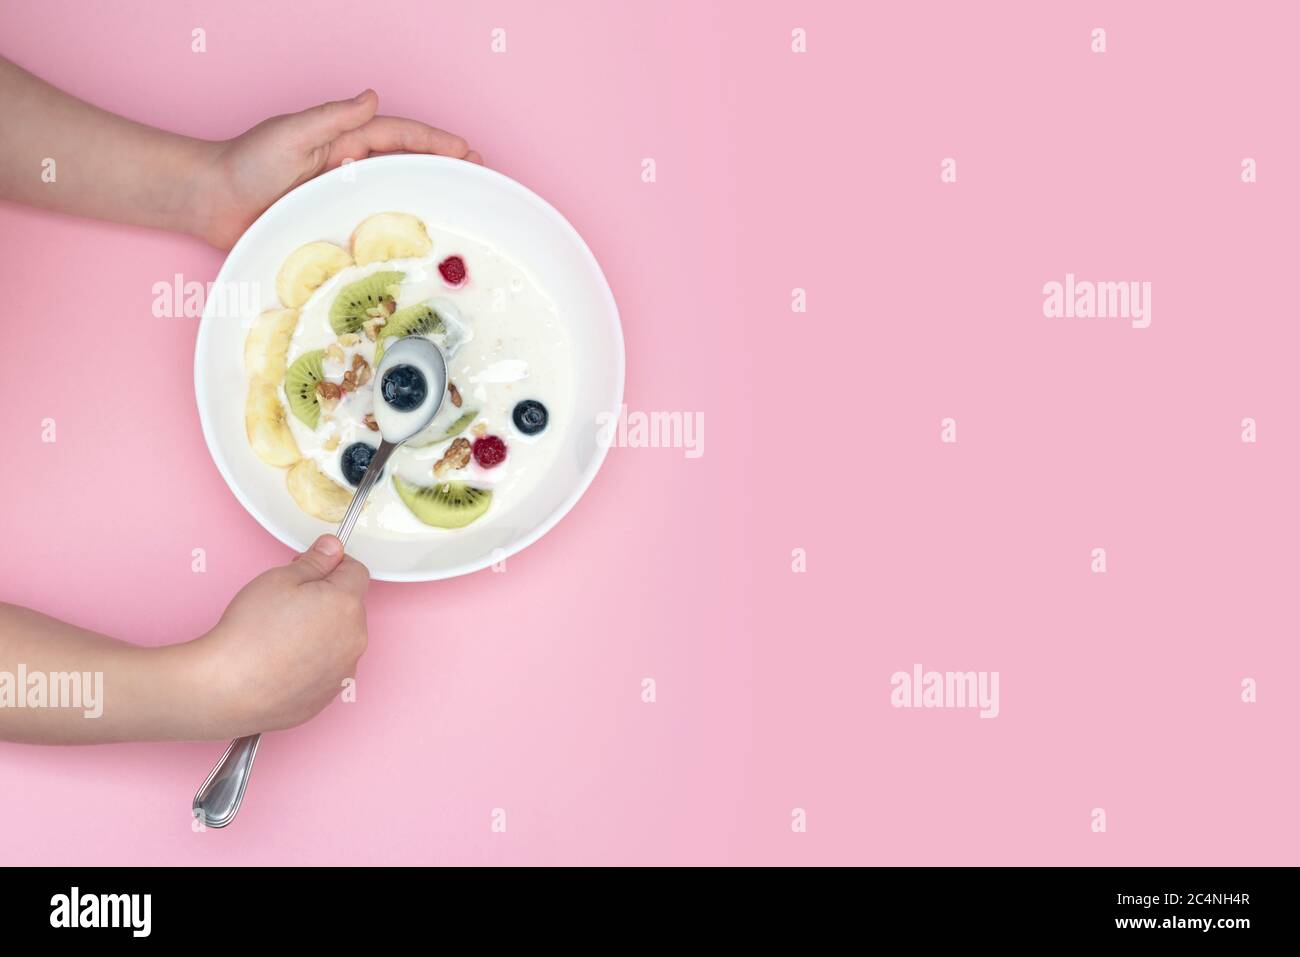 Child's hands hold a bowl and a spoonful of superfood smoothie. Bowl: yogurt, blueberries, kiwi, banana, nuts. View from above. Stock Photo